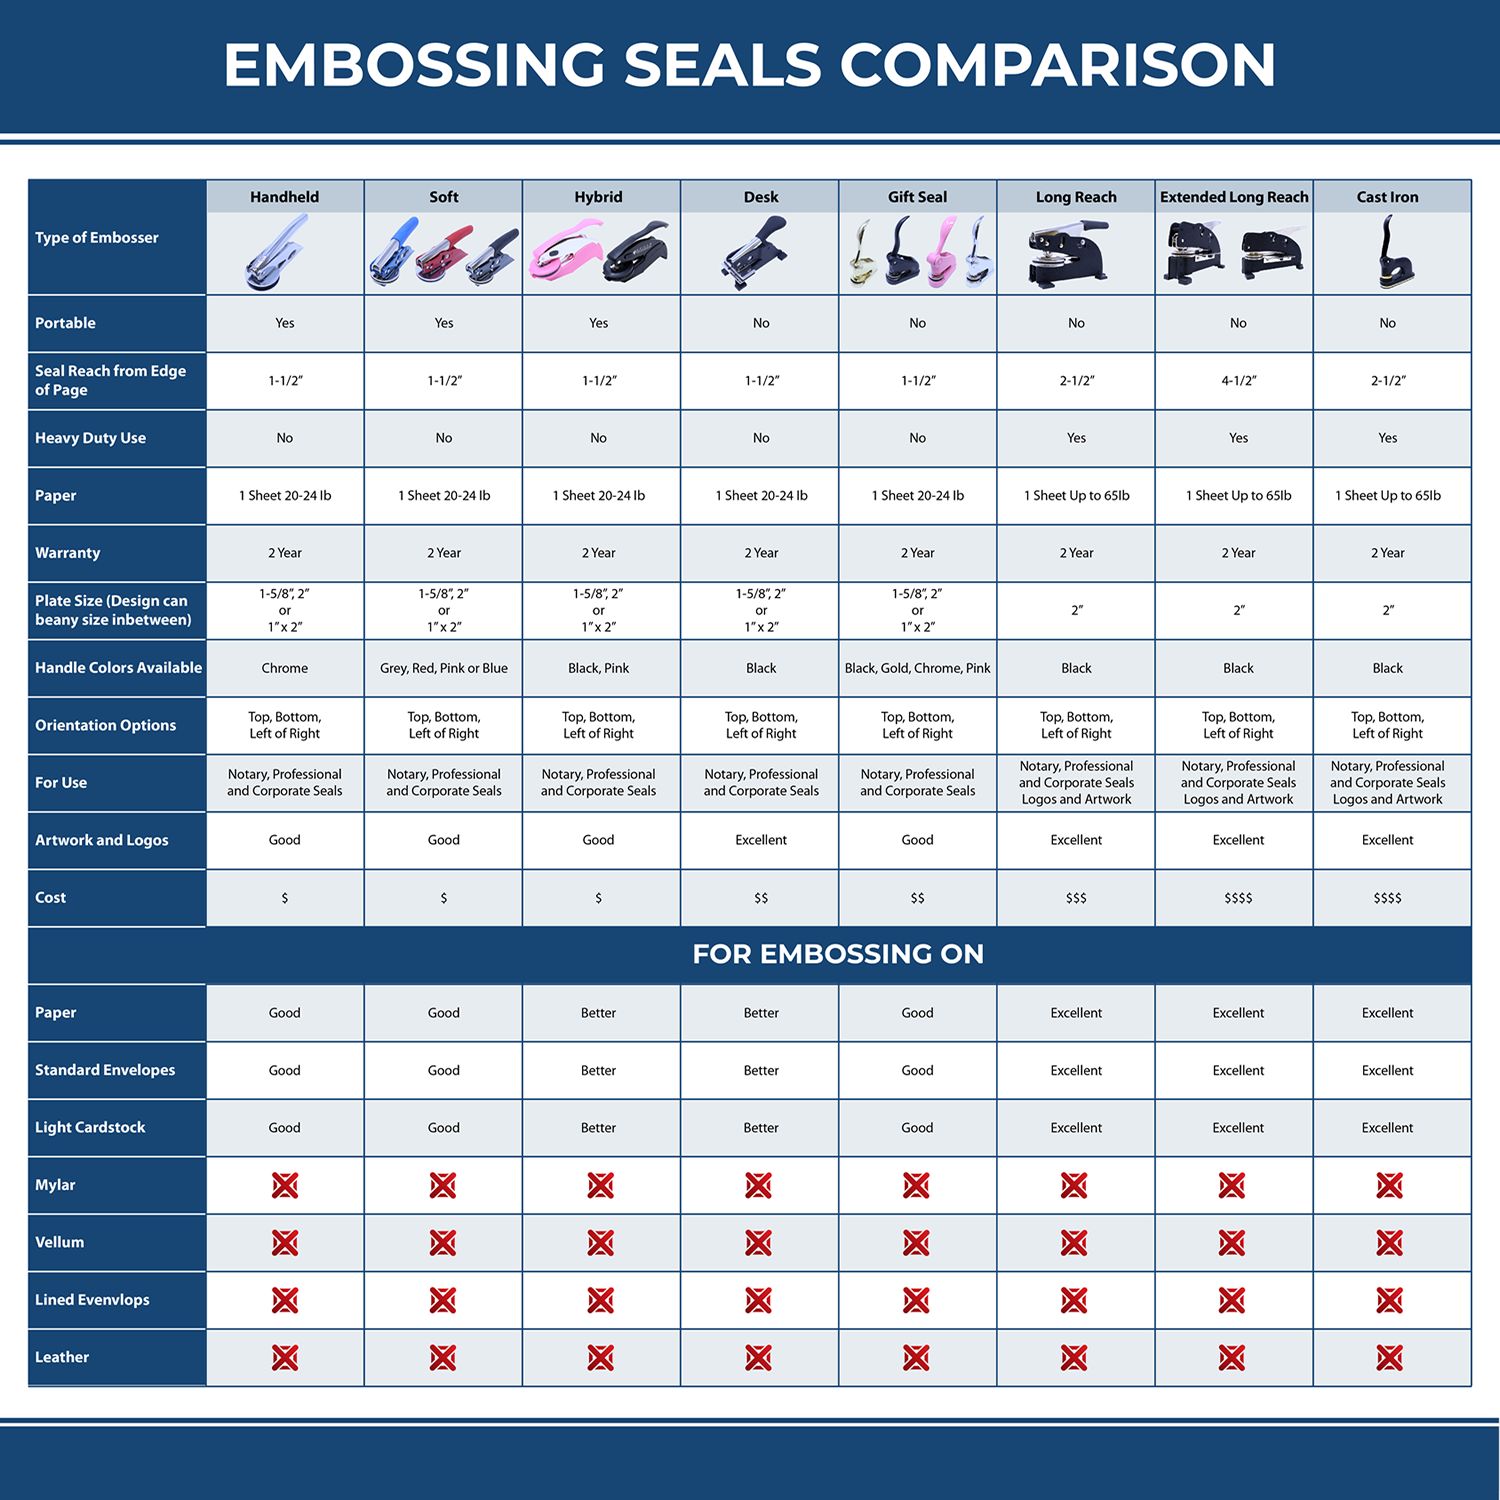 A comparison chart for the different types of mount models available for the State of North Carolina Architectural Seal Embosser.